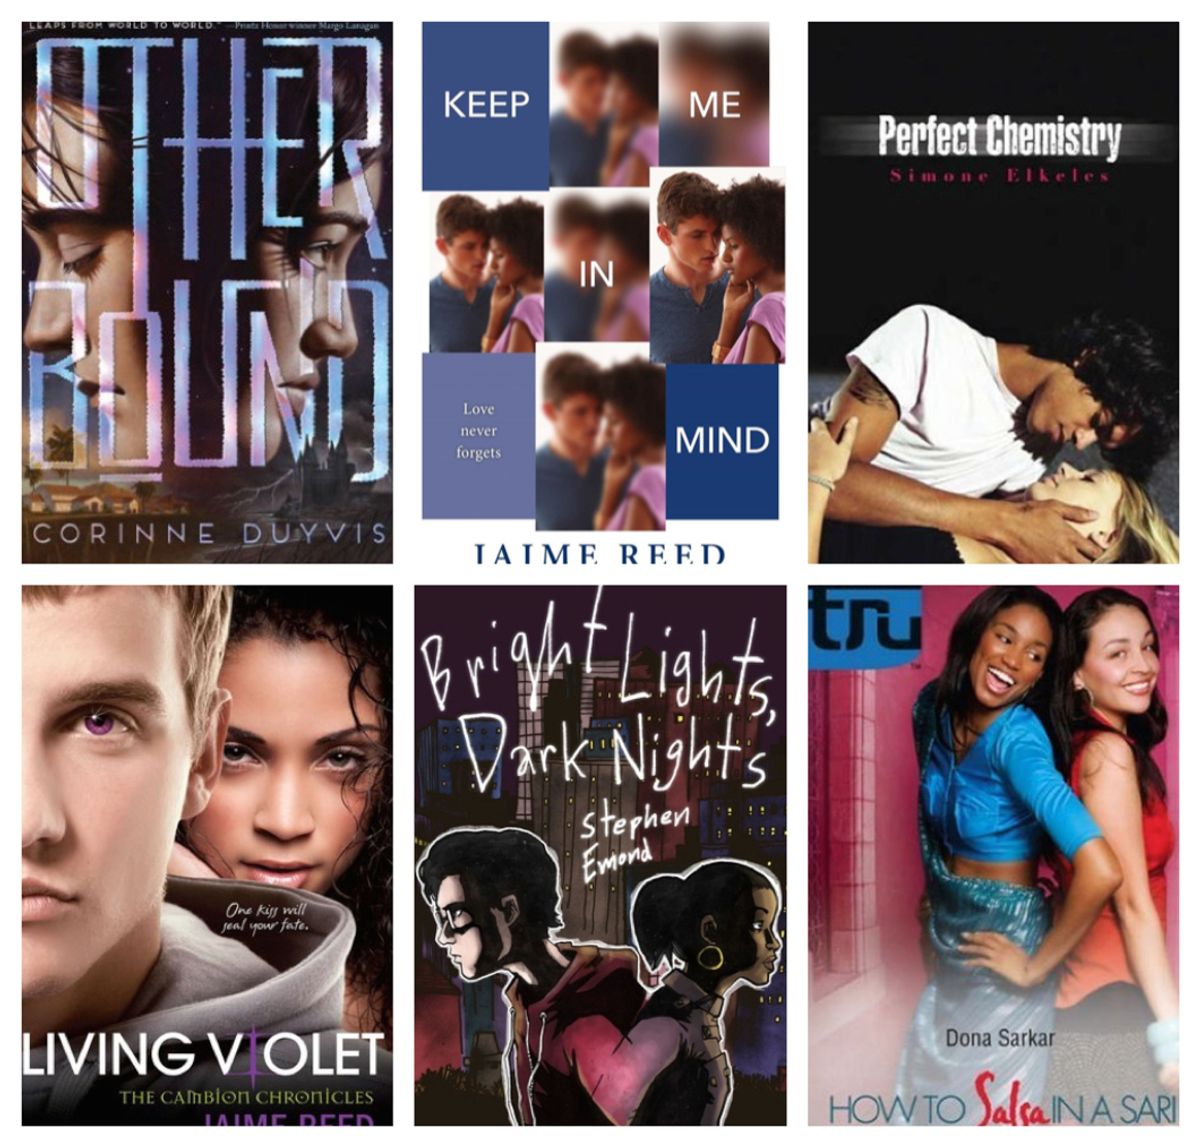 The Neglected Genre And Life Of An Interracial Romance Novel